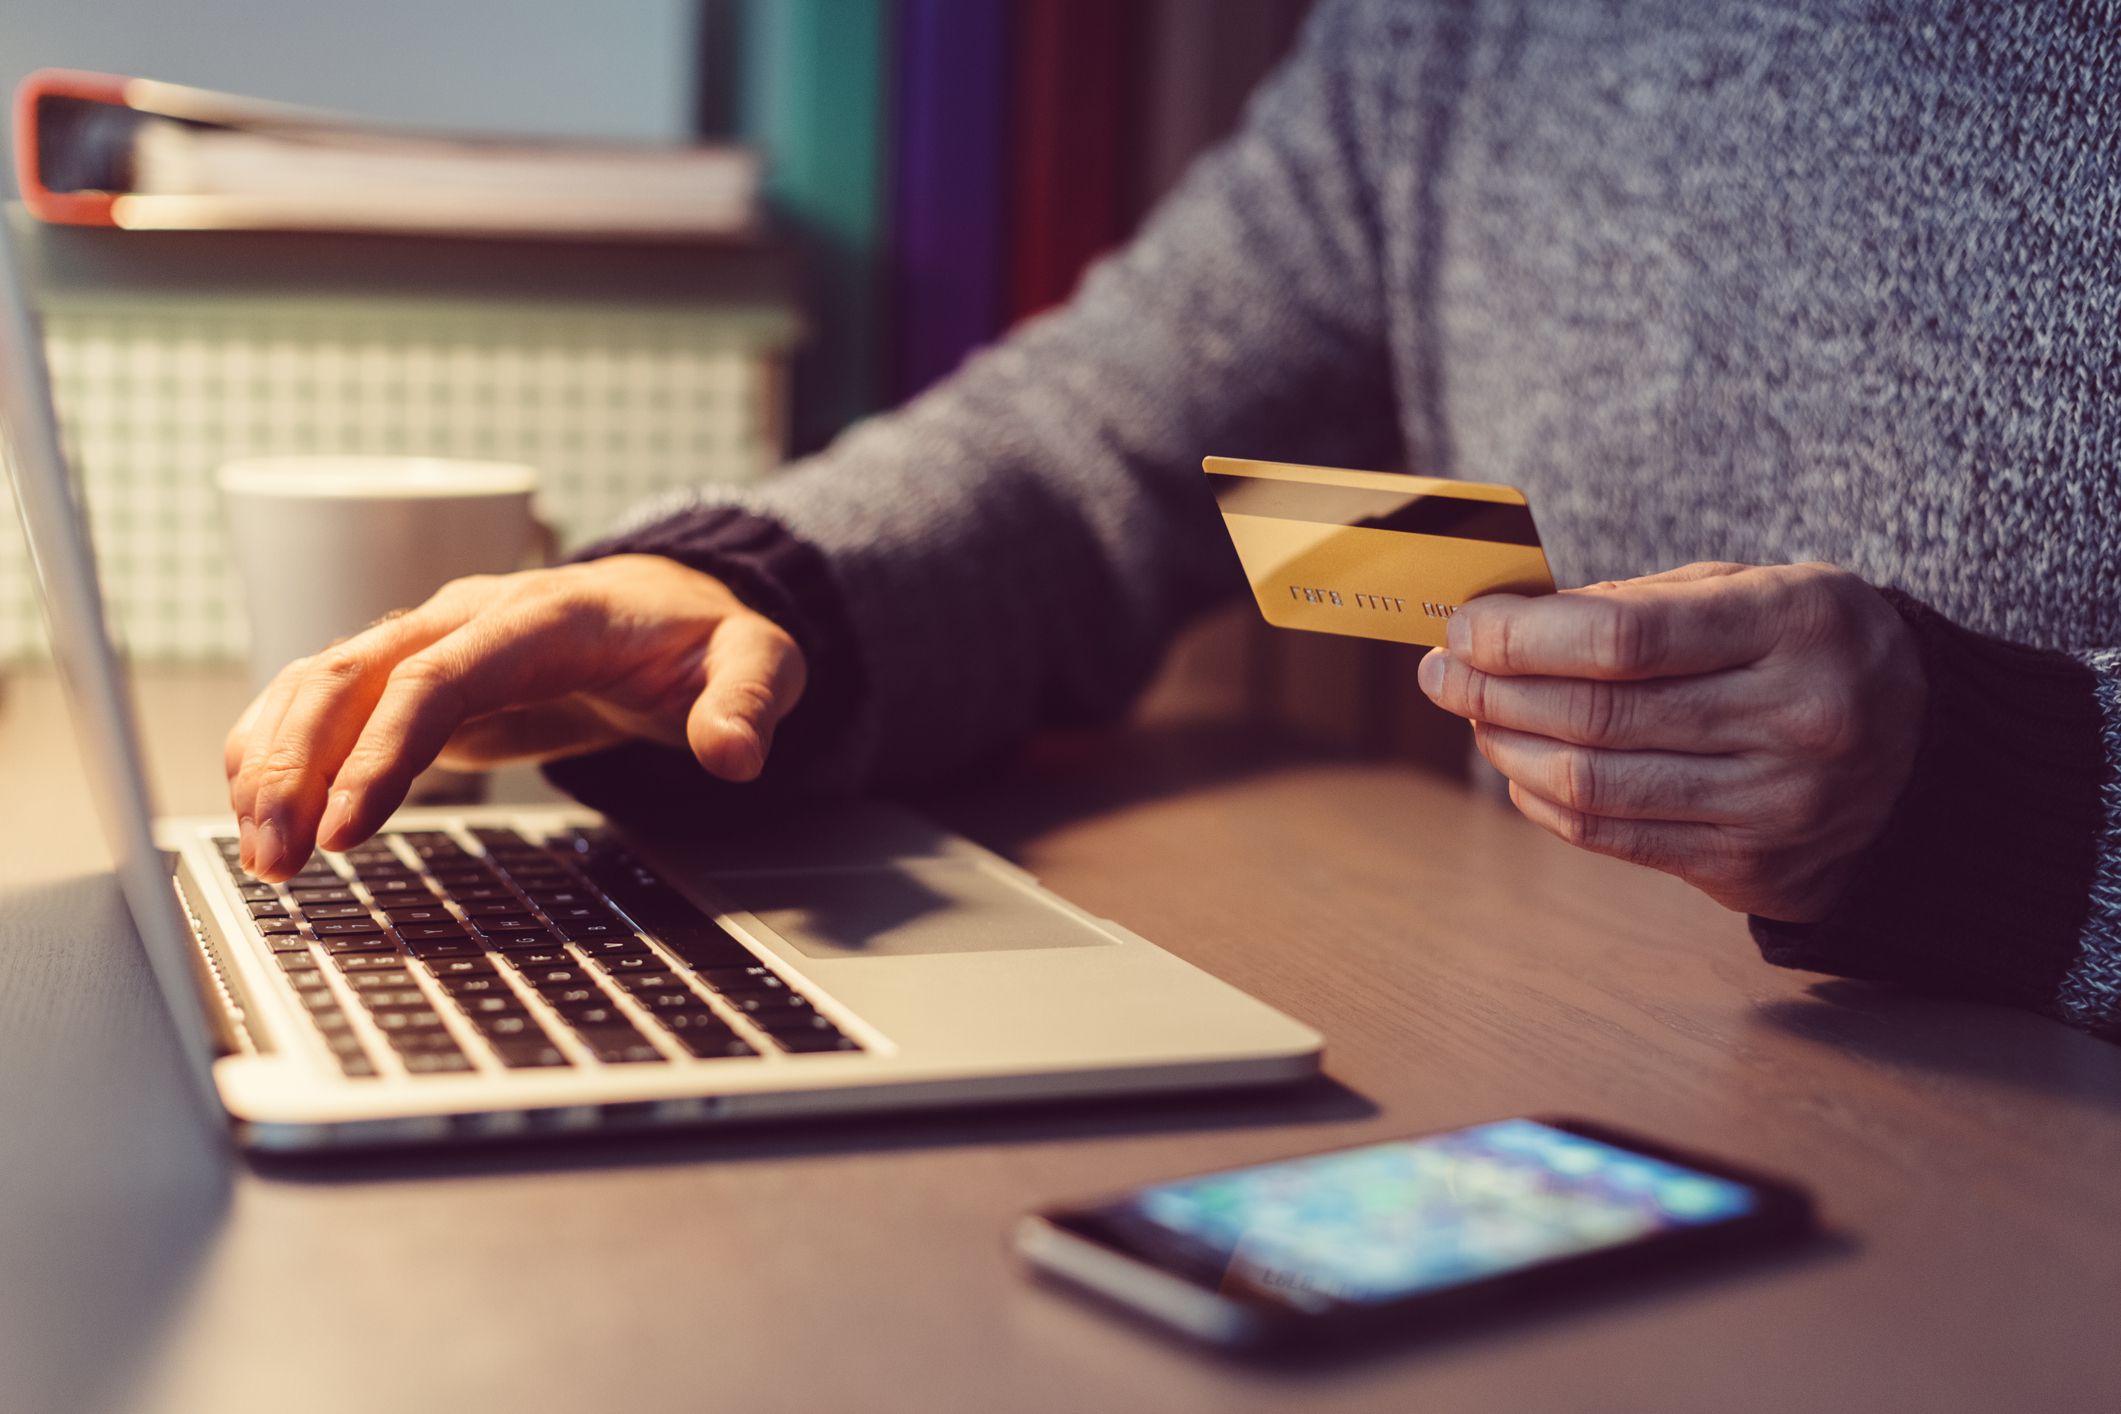 How to Pay Online With Debit or Credit Cards (Safely)